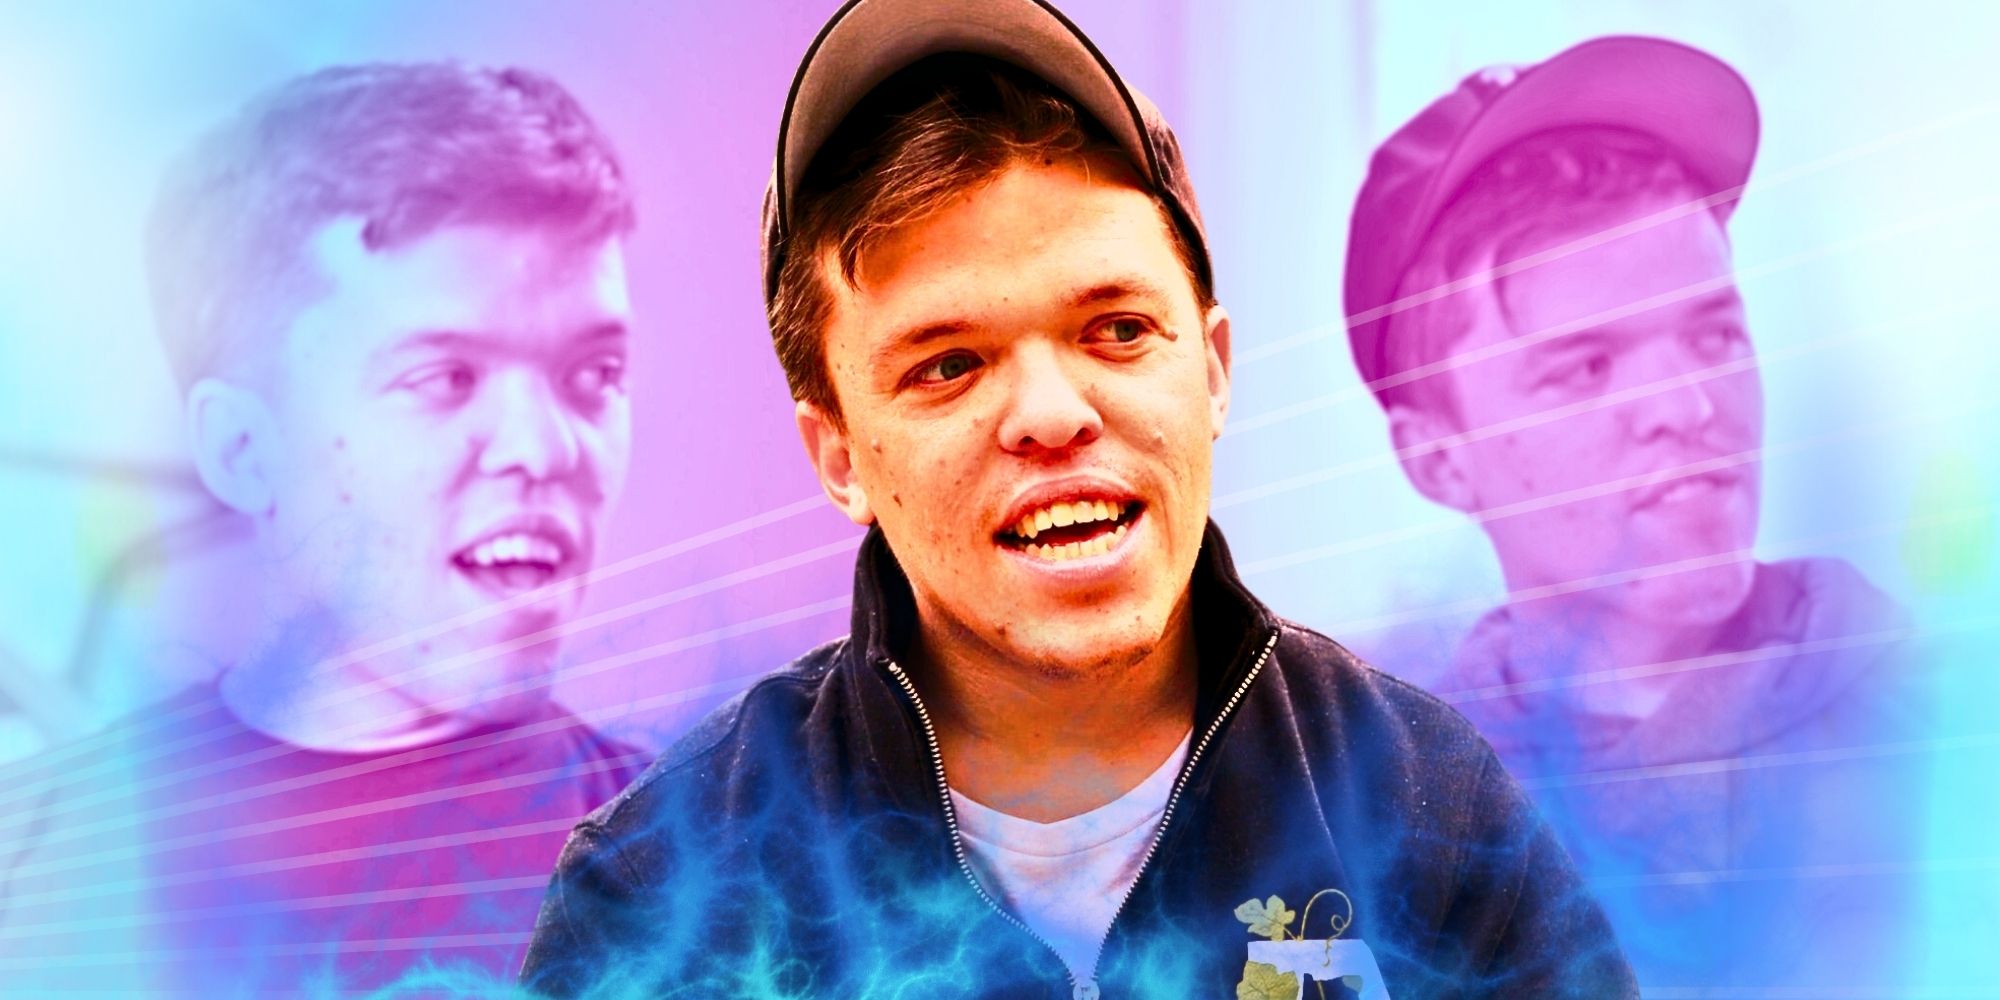 Zach Roloff from Little People, Big World smiles in the center of two other photos of him speaking.